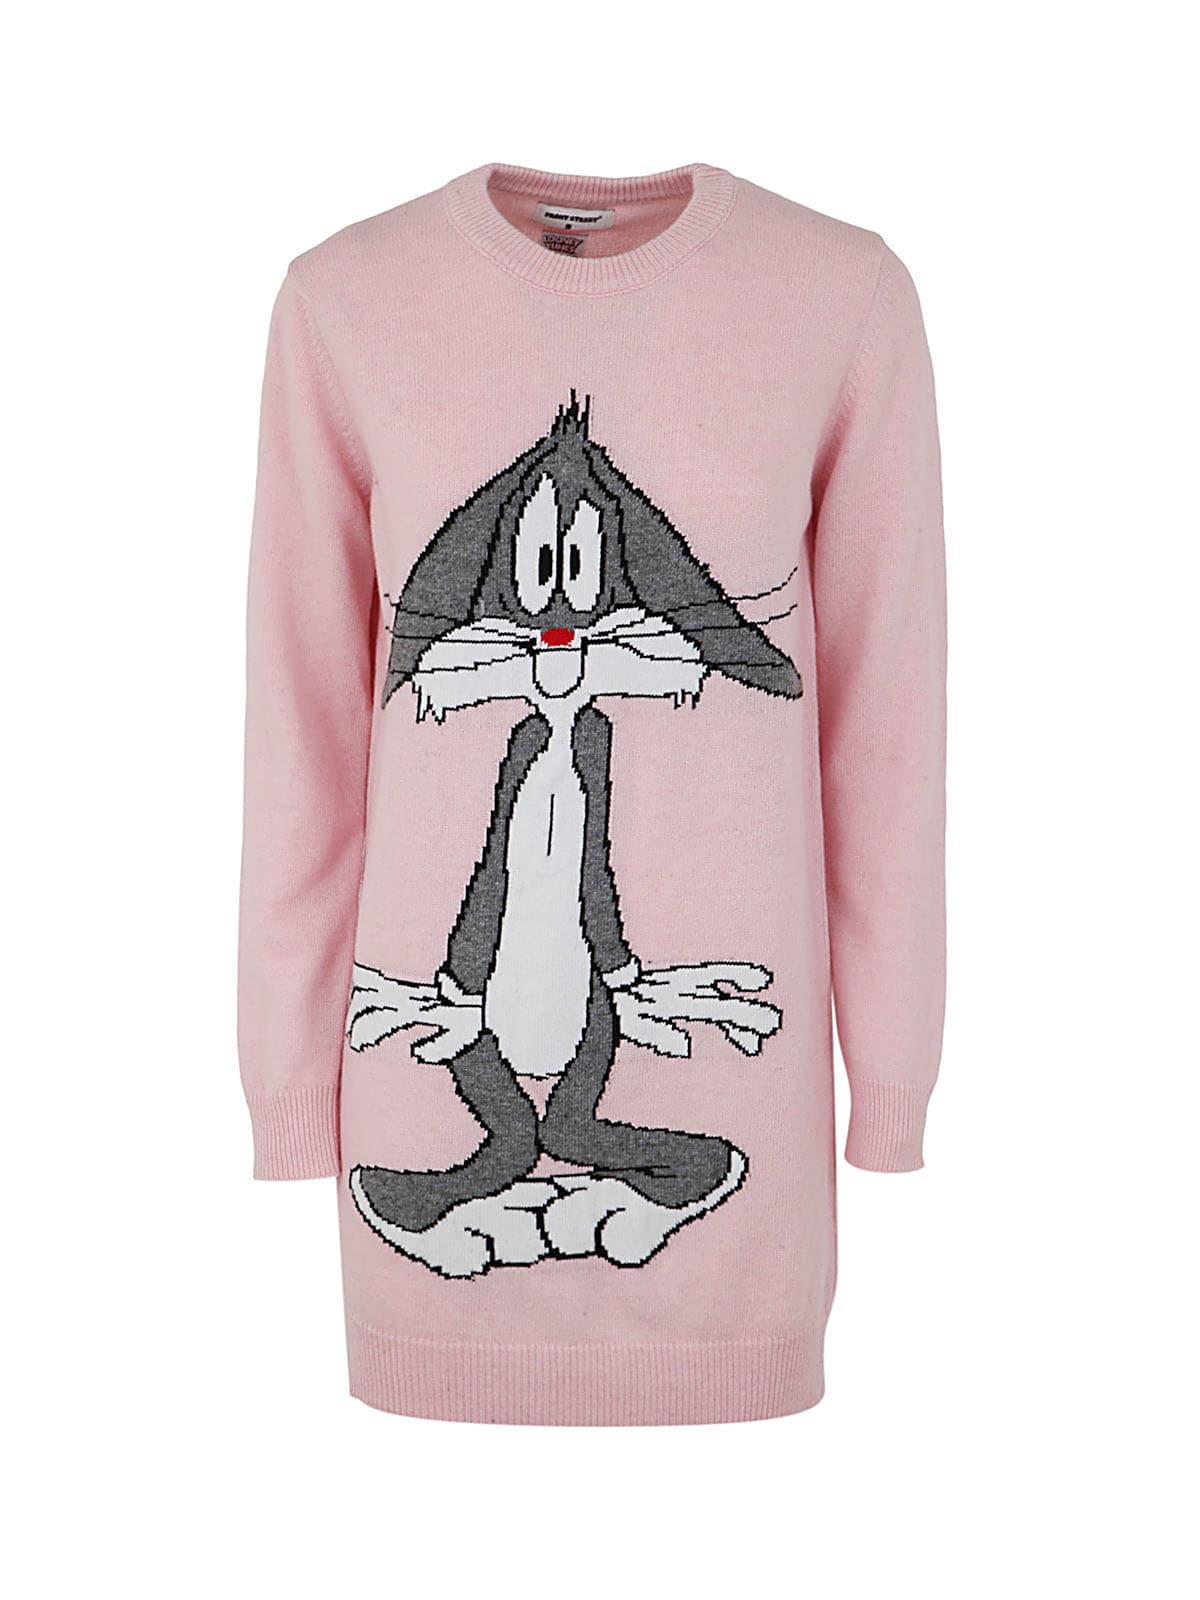 Front Street 8 Bugs Bunny Over Sweater